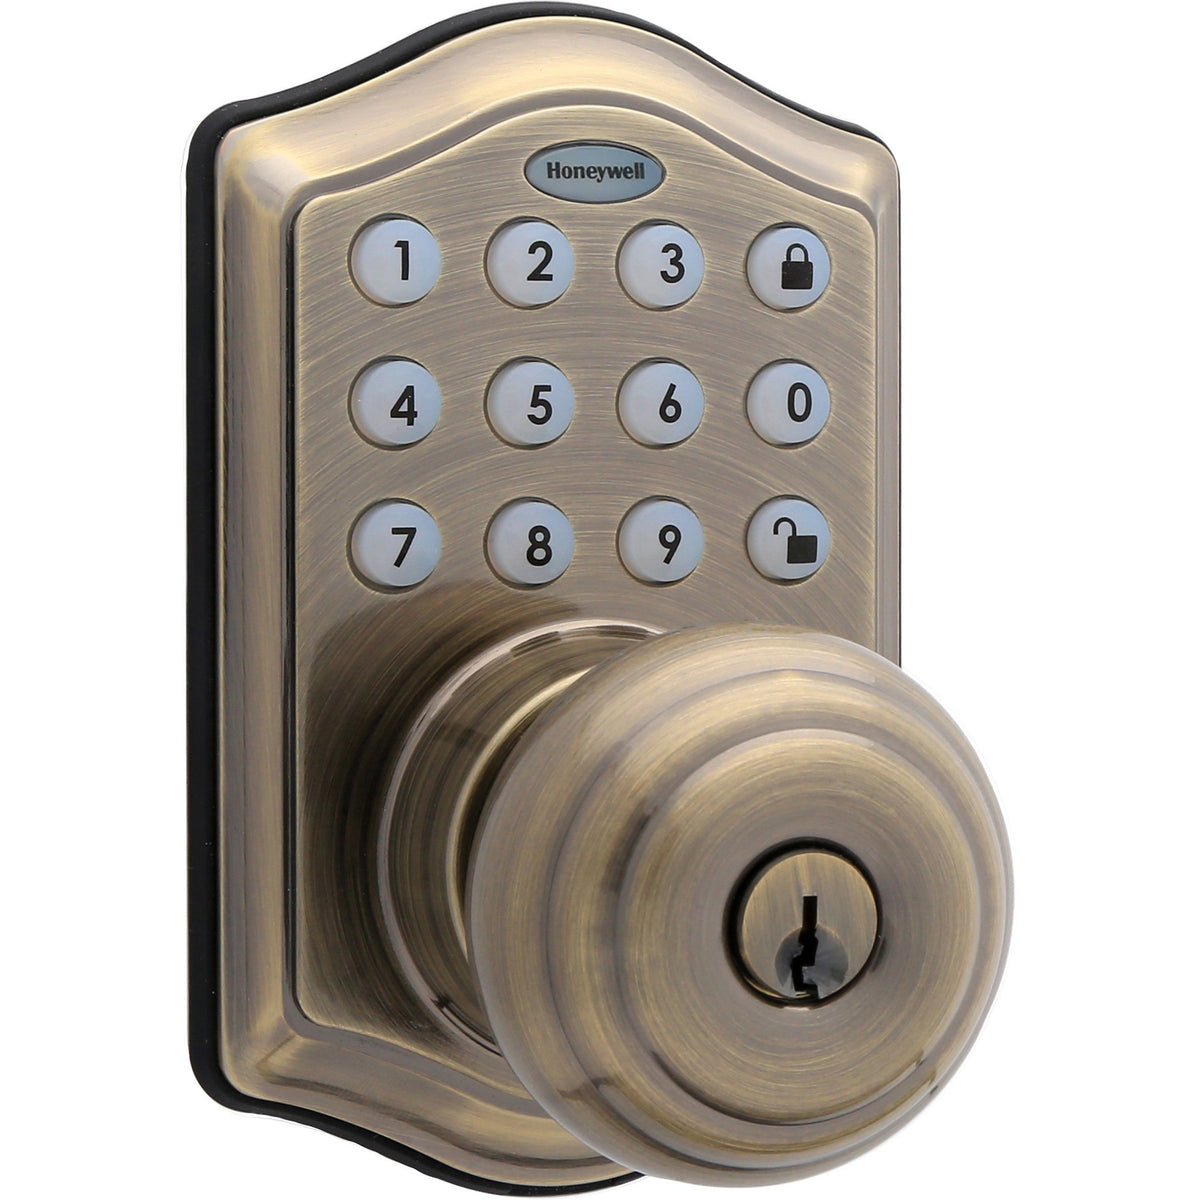 Honeywell 8732101 Electronic Entry Knob Door Lock with Keypad in Antique Brass